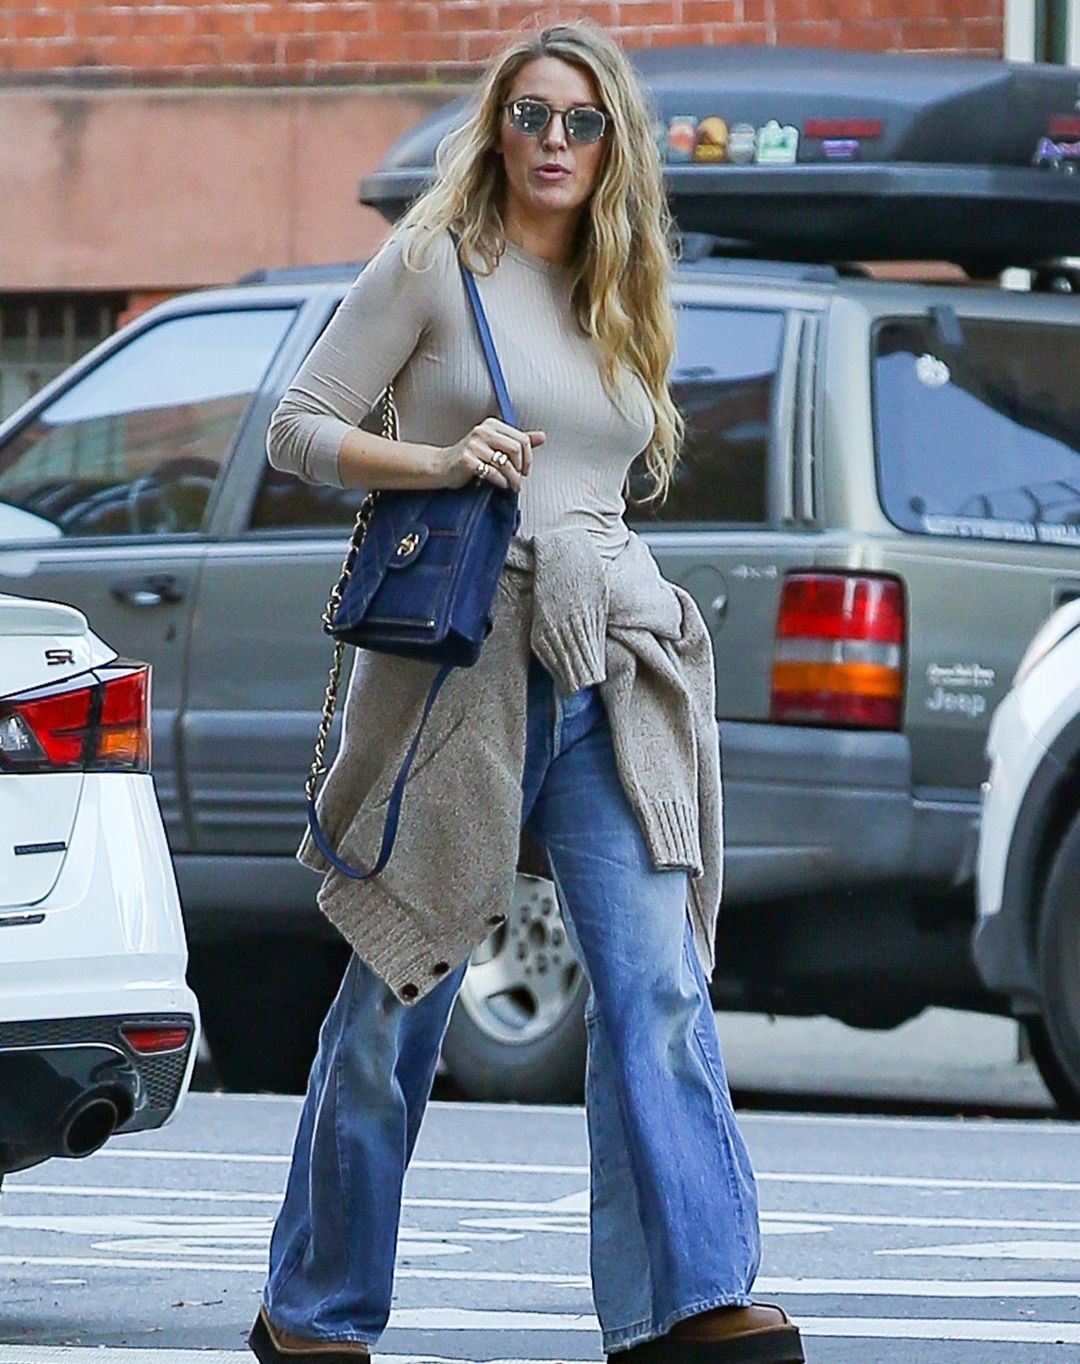 Blake Lively Spotted in Ugg x Open Ceremony Clogs for the Second Time, Proving Clogs Are Still In